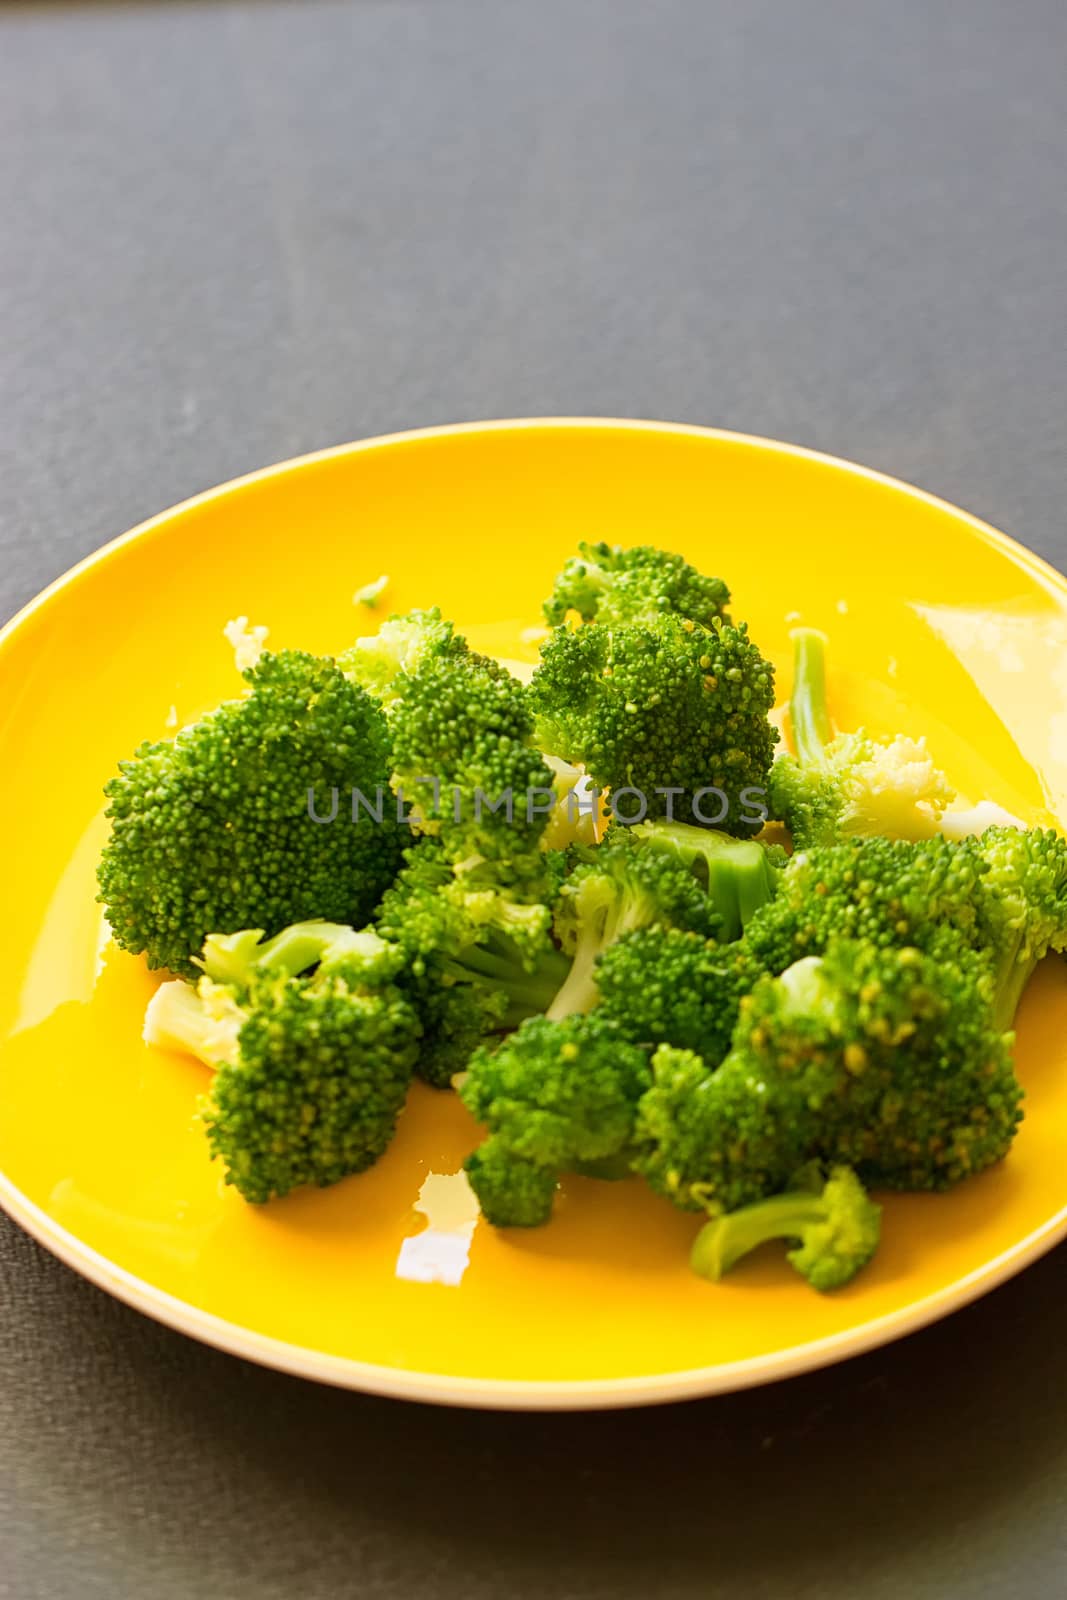 Fresh broccoli cut in yellow plate healthy natural clean food vegetable on wood background